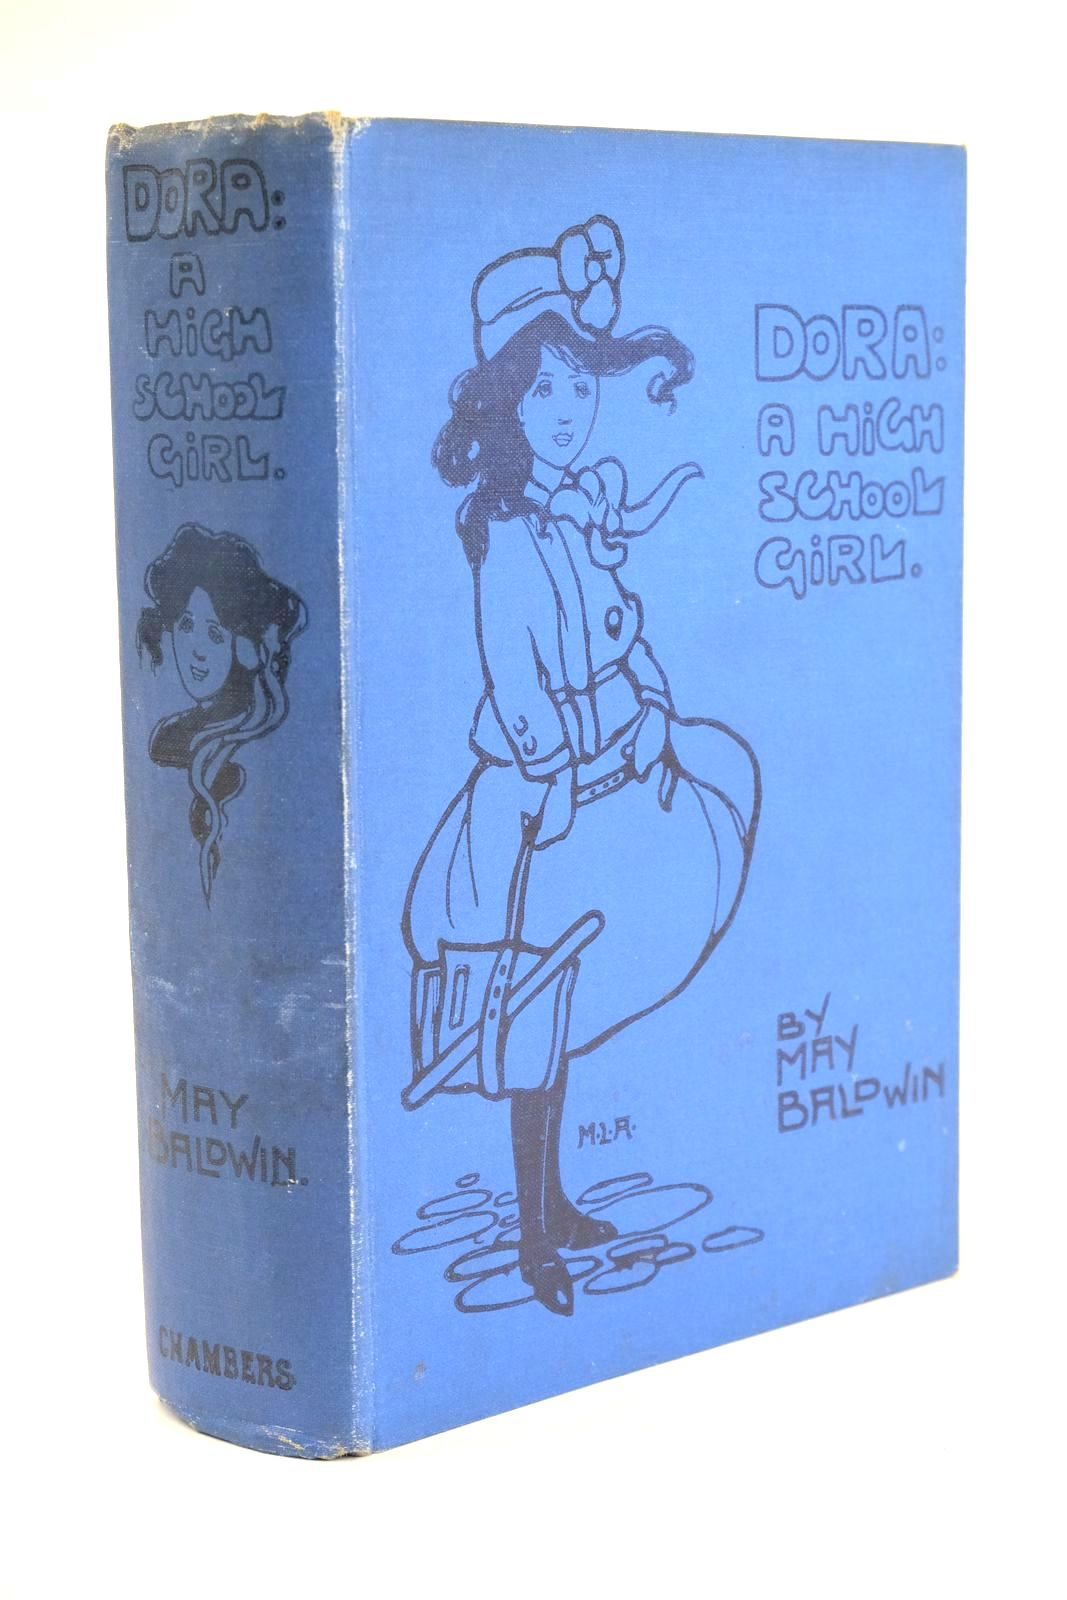 Photo of DORA: A HIGH SCHOOL GIRL written by Baldwin, May illustrated by Attwell, Mabel Lucie published by W. &amp; R. Chambers Limited (STOCK CODE: 1324698)  for sale by Stella & Rose's Books